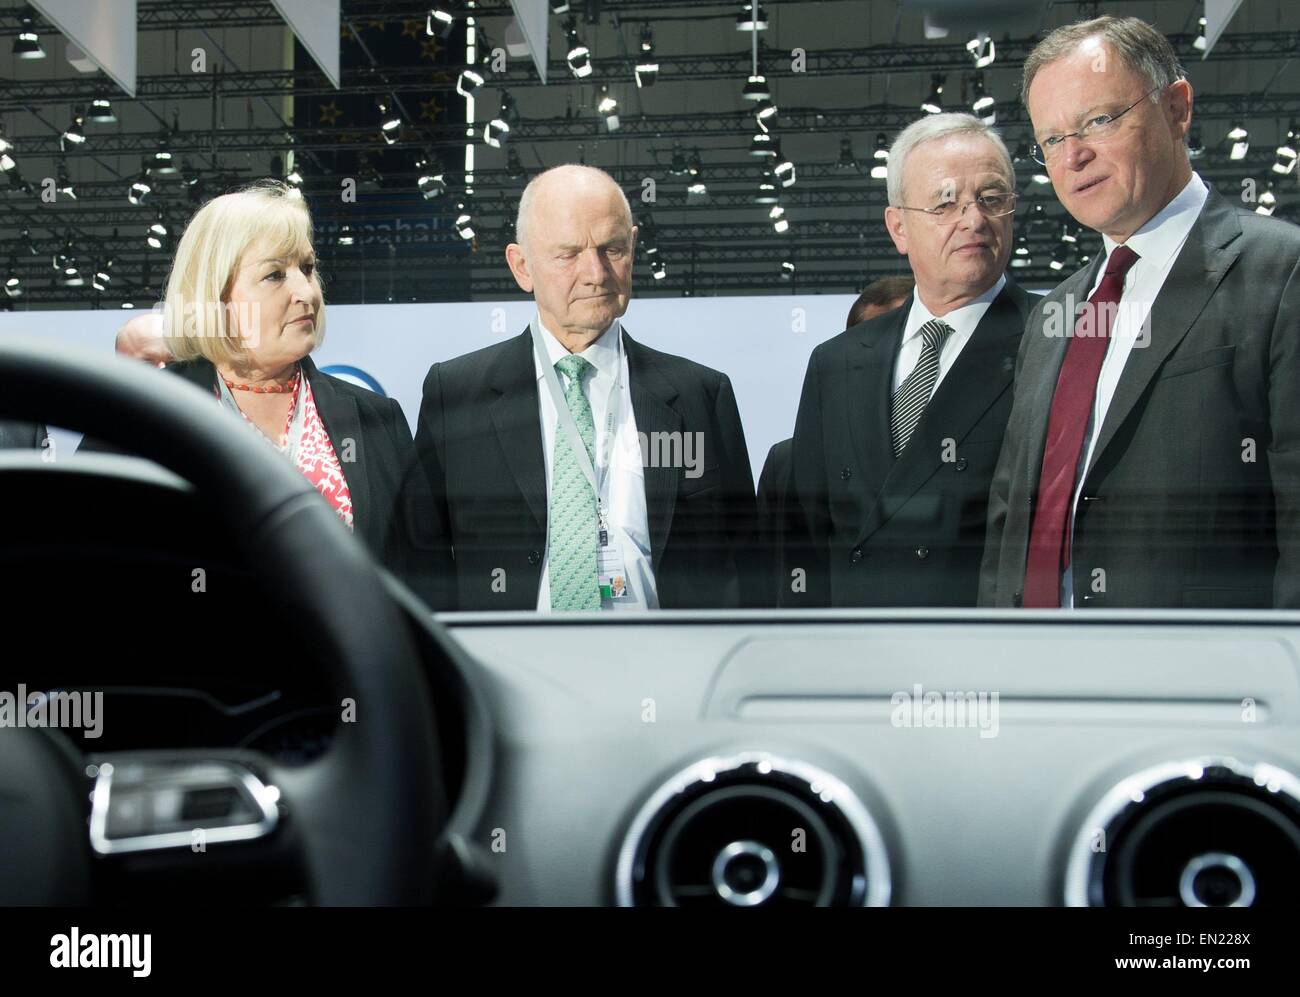 Hanover, Germany. 25th Apr, 2013. Chairman of the supervisory board of Volkswagen AG, Ferdinand Piech (2.f.L.), his wife and supervisory board member, Ursula Piech (L), the CEO of Volkswagen AG Martin Winterkorn (L), and Minister President of Lower Saxony, Stephan Weil, stand together before the start of a Volkswagen AG general meeting in Hanover, Germany, 25 April 2013. Photo: JULIAN STRATENSCHULTE/dpa/Alamy Live News Stock Photo